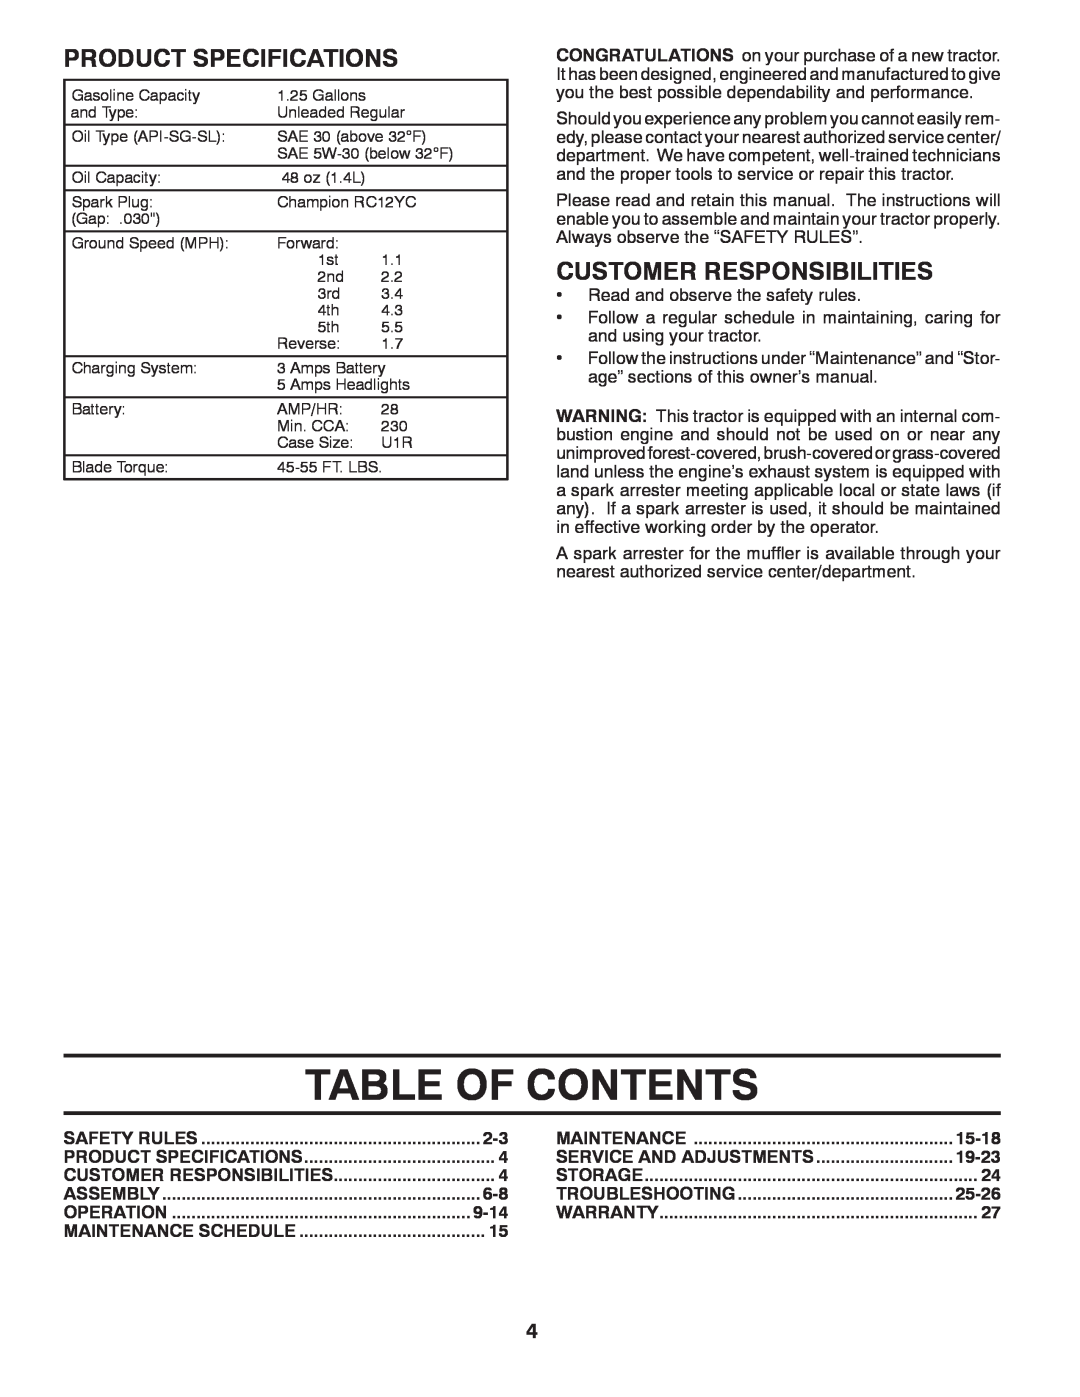 Poulan 960120068 manual Table Of Contents, Product Specifications, Customer Responsibilities 